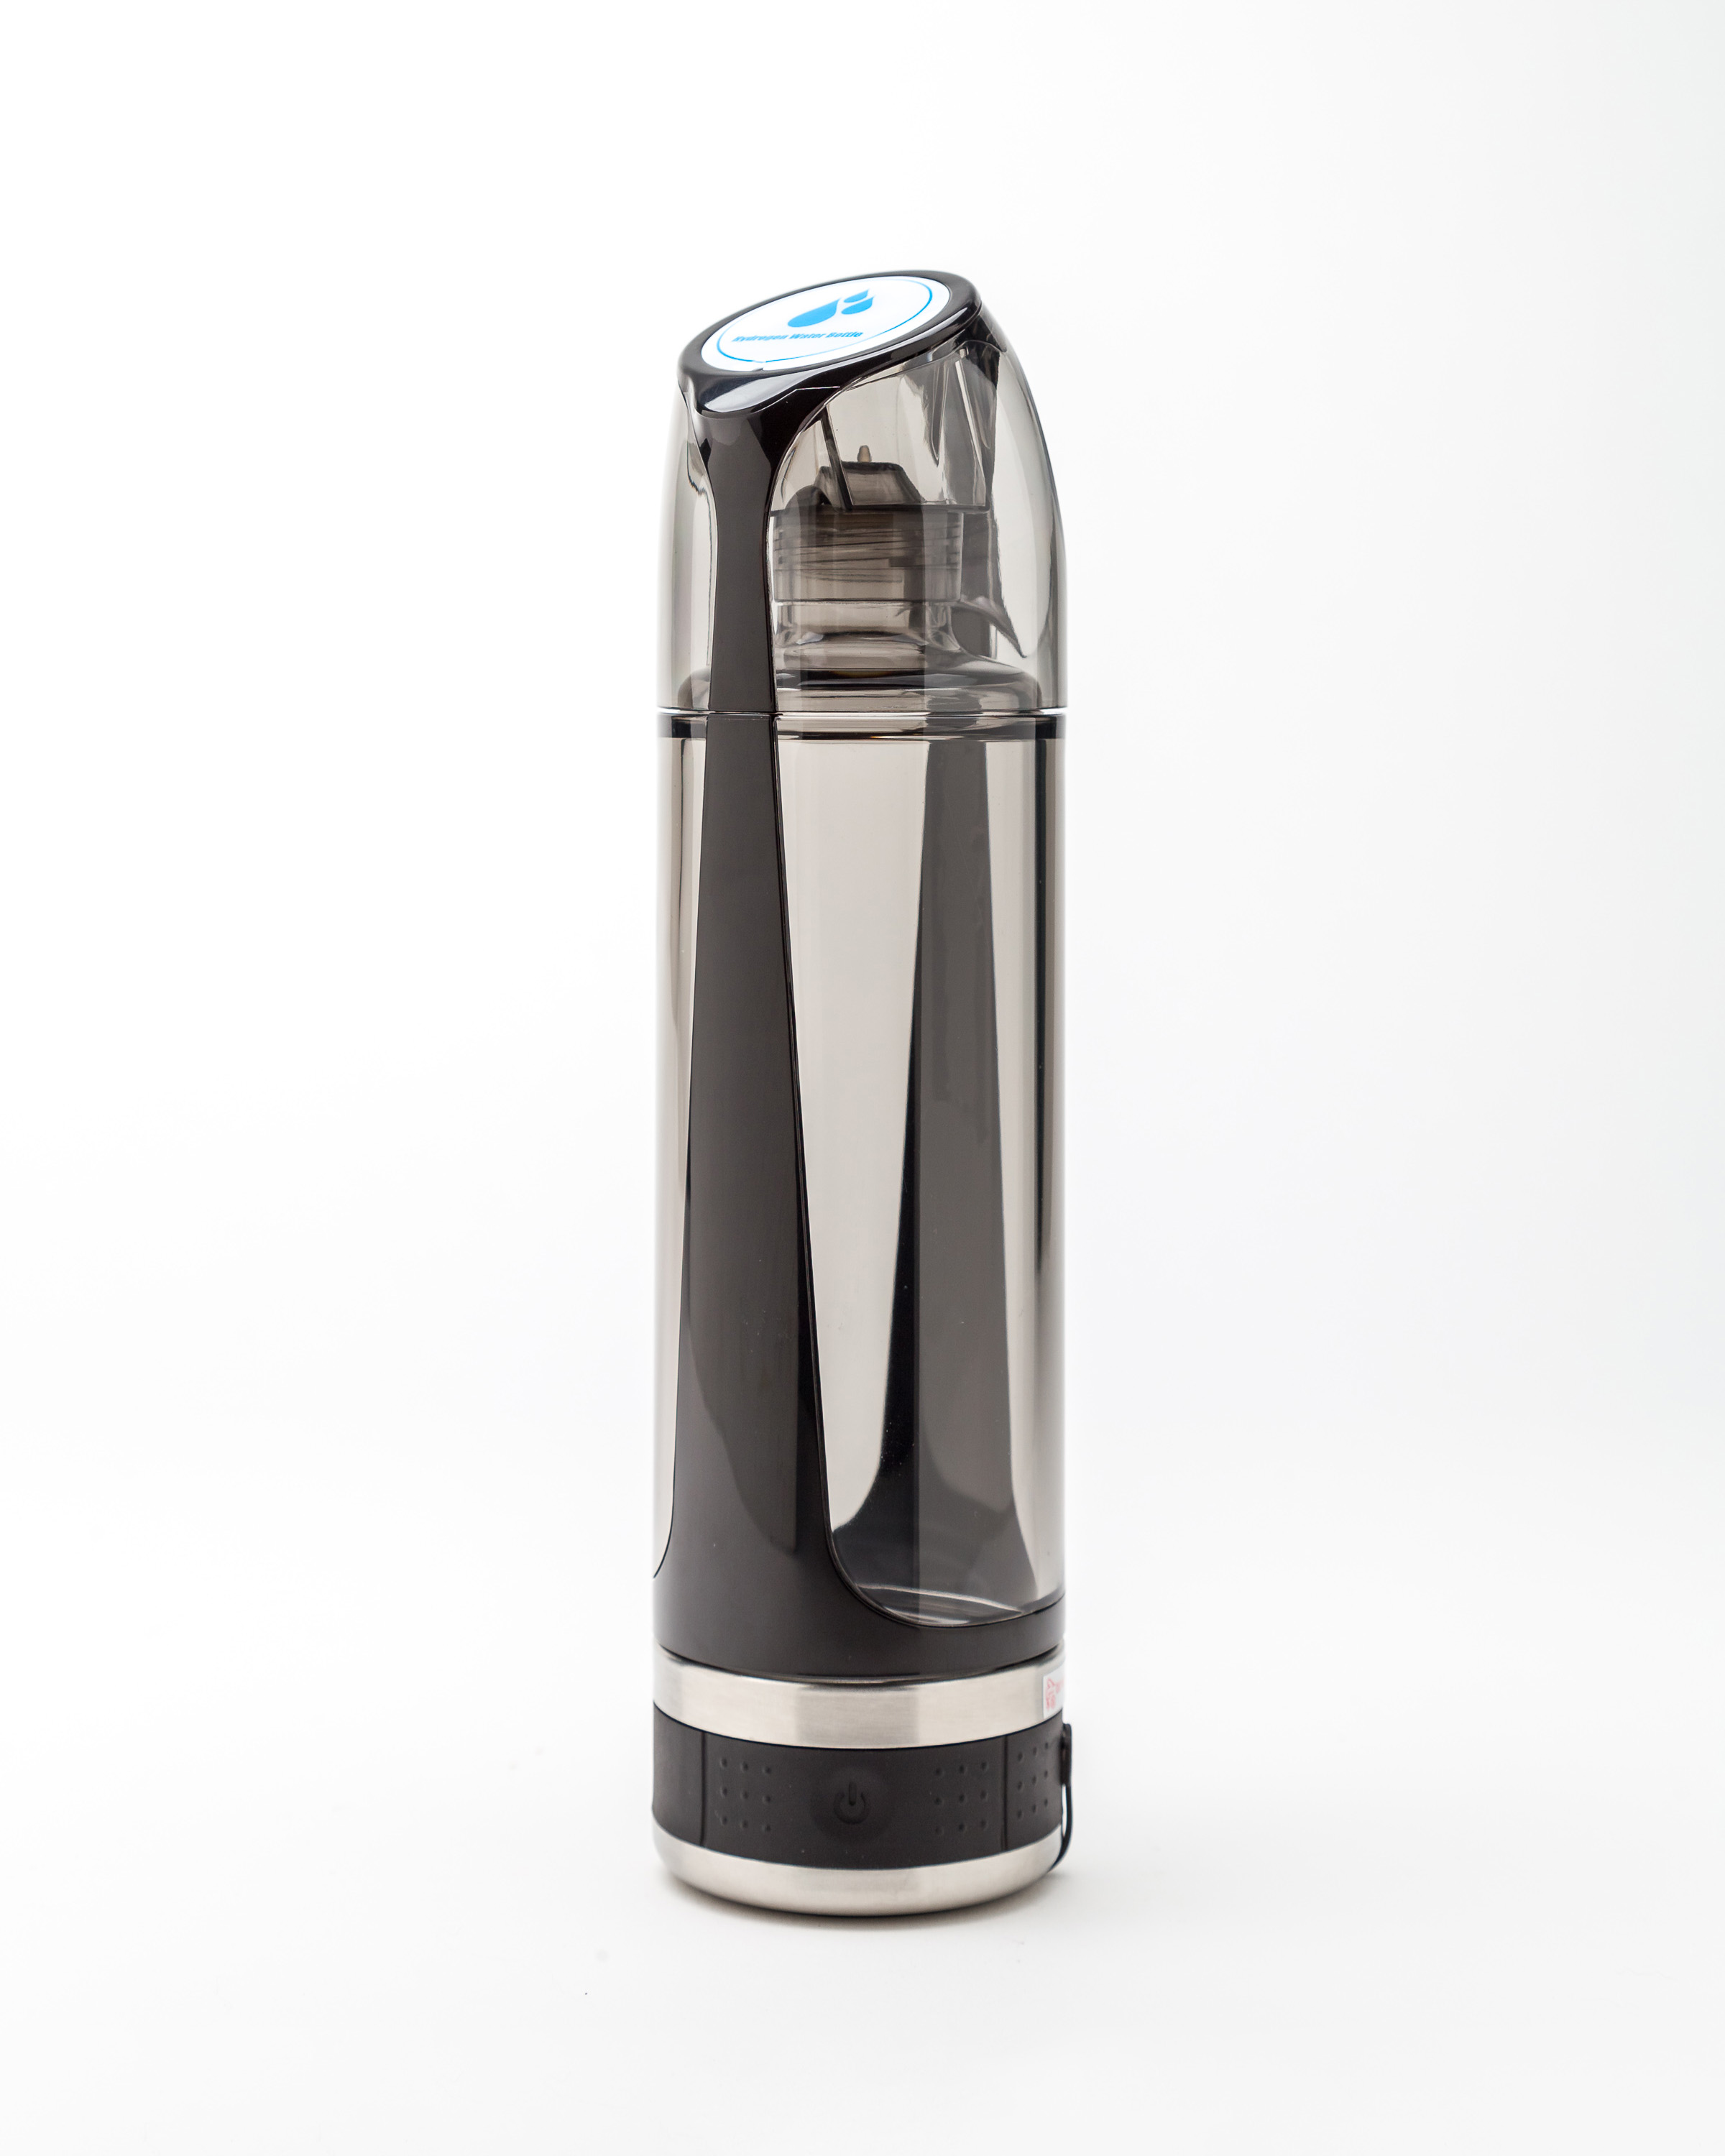 Hydrogen Water Bottle Healthy H2 ORP Water on the Go!